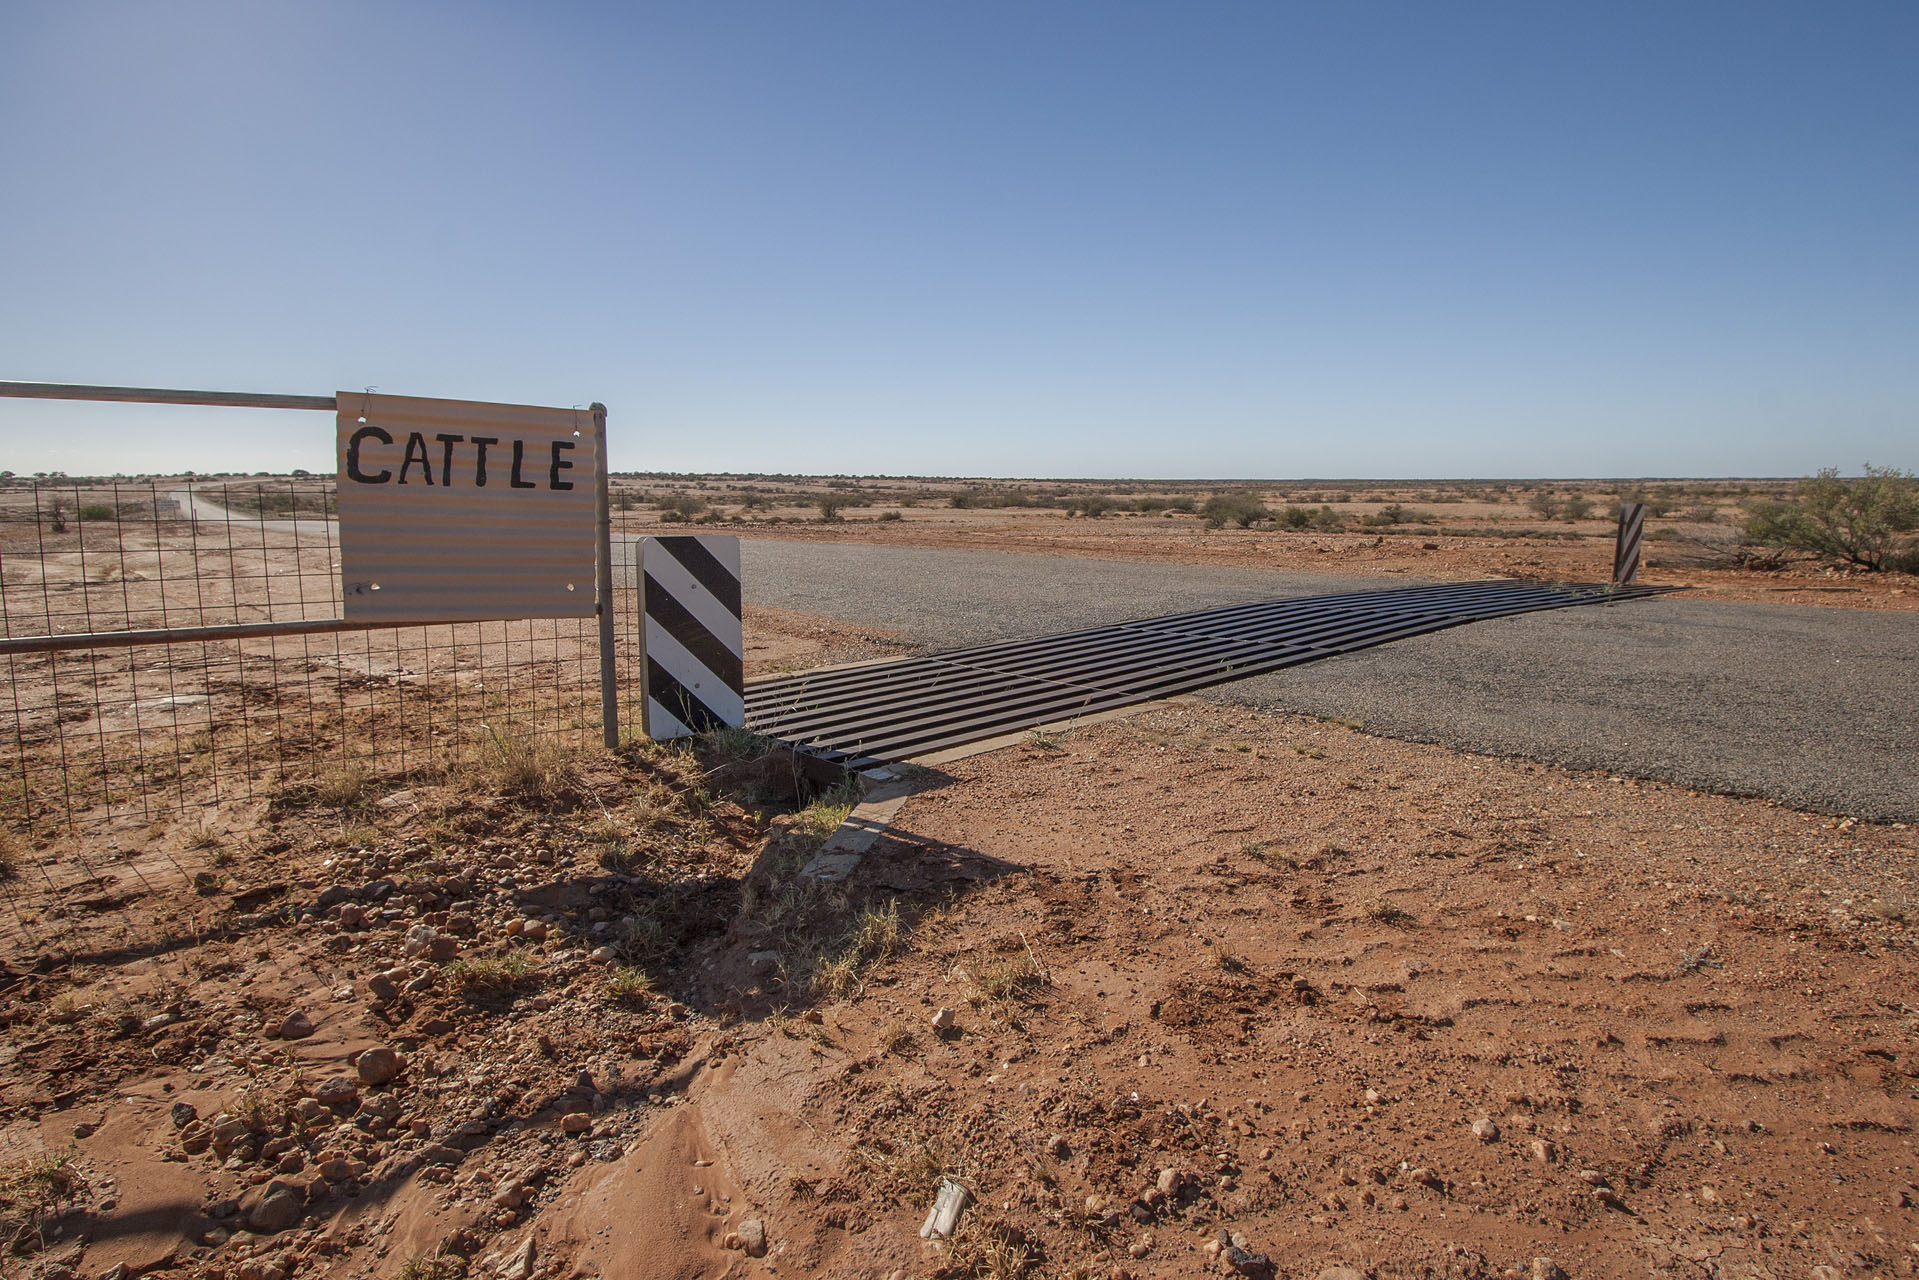 Cattle grids.